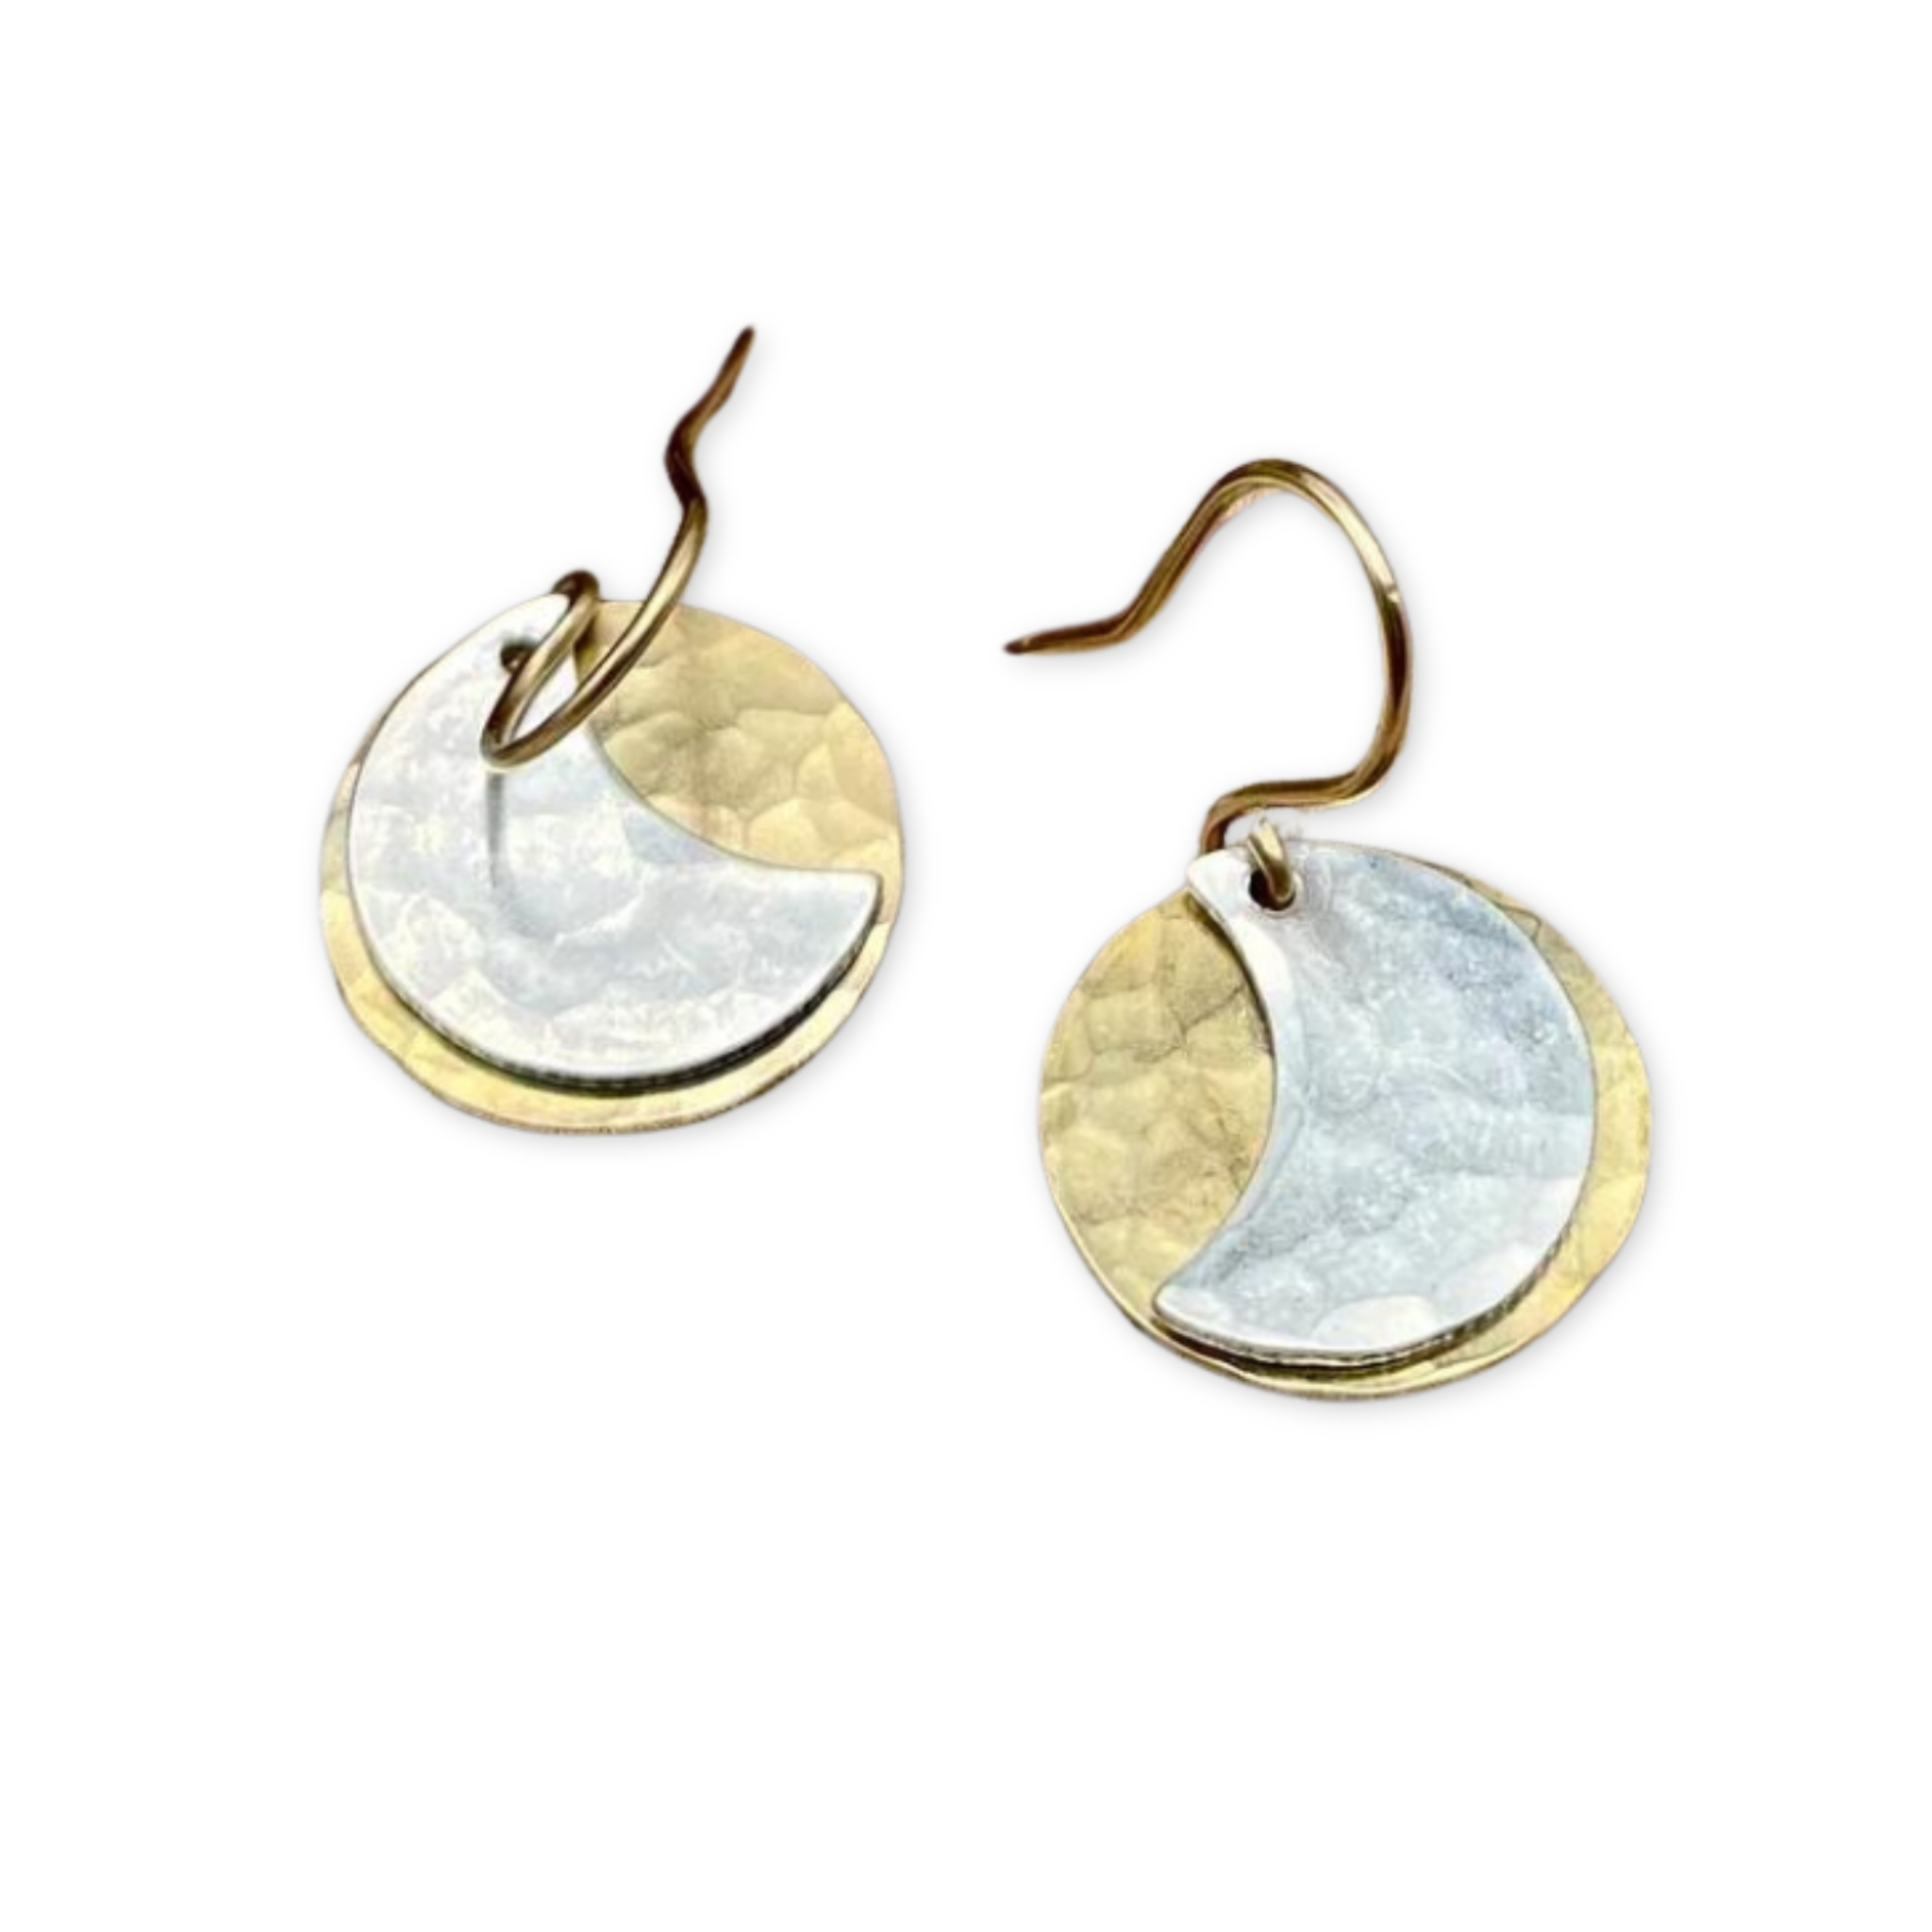 layered earrings with a hammered round disc and a hammered crescent moon